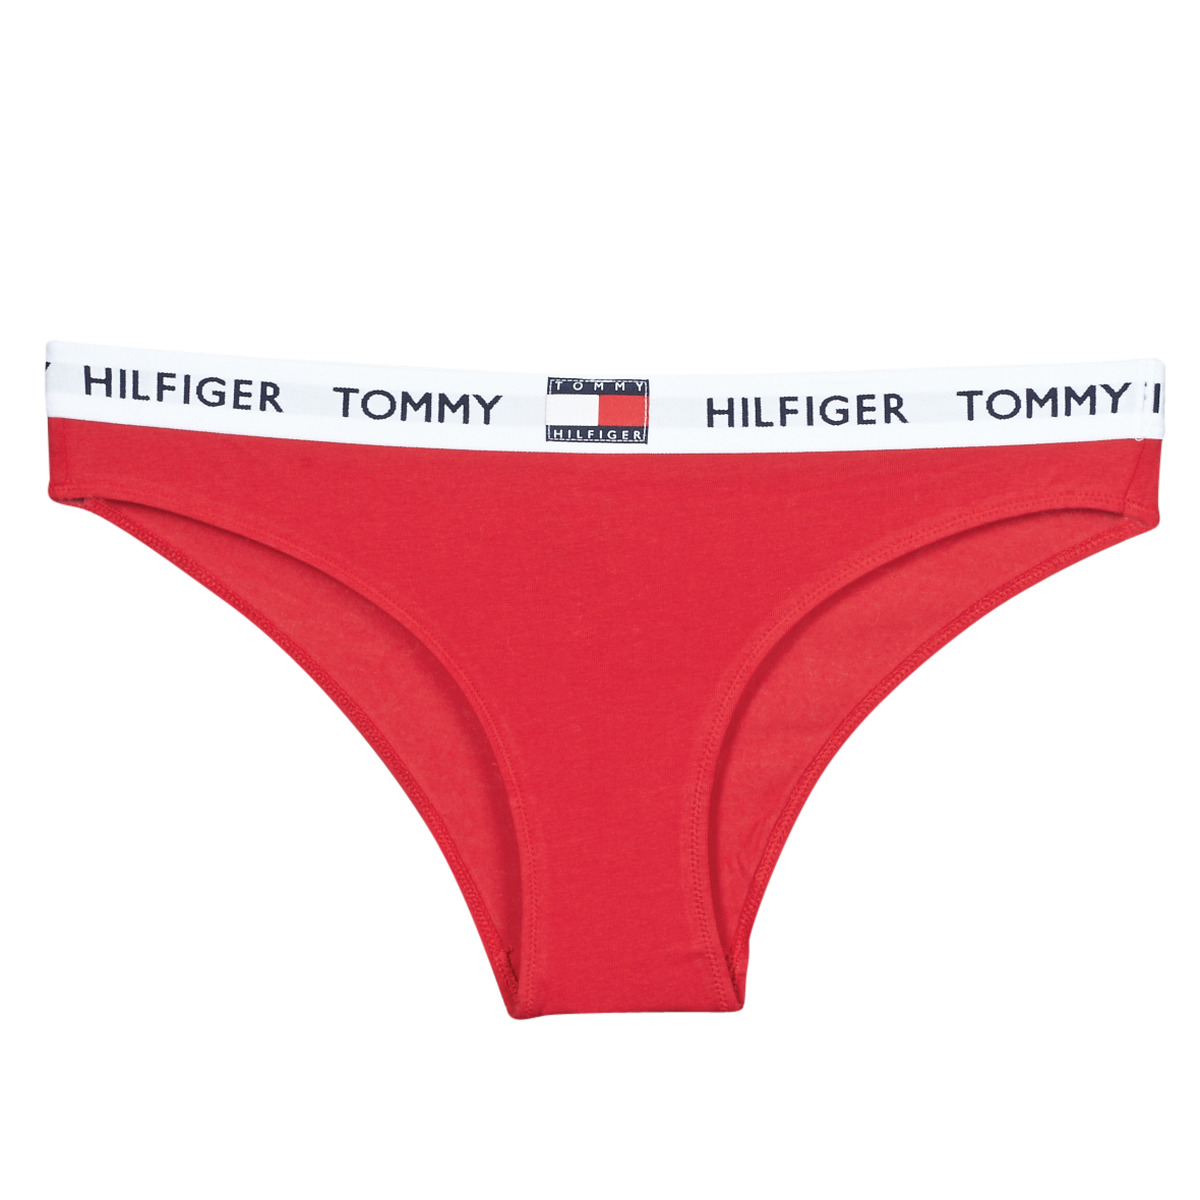 Tommy Hilfiger Underwear Lace Tanga Brief French Orchid Women's